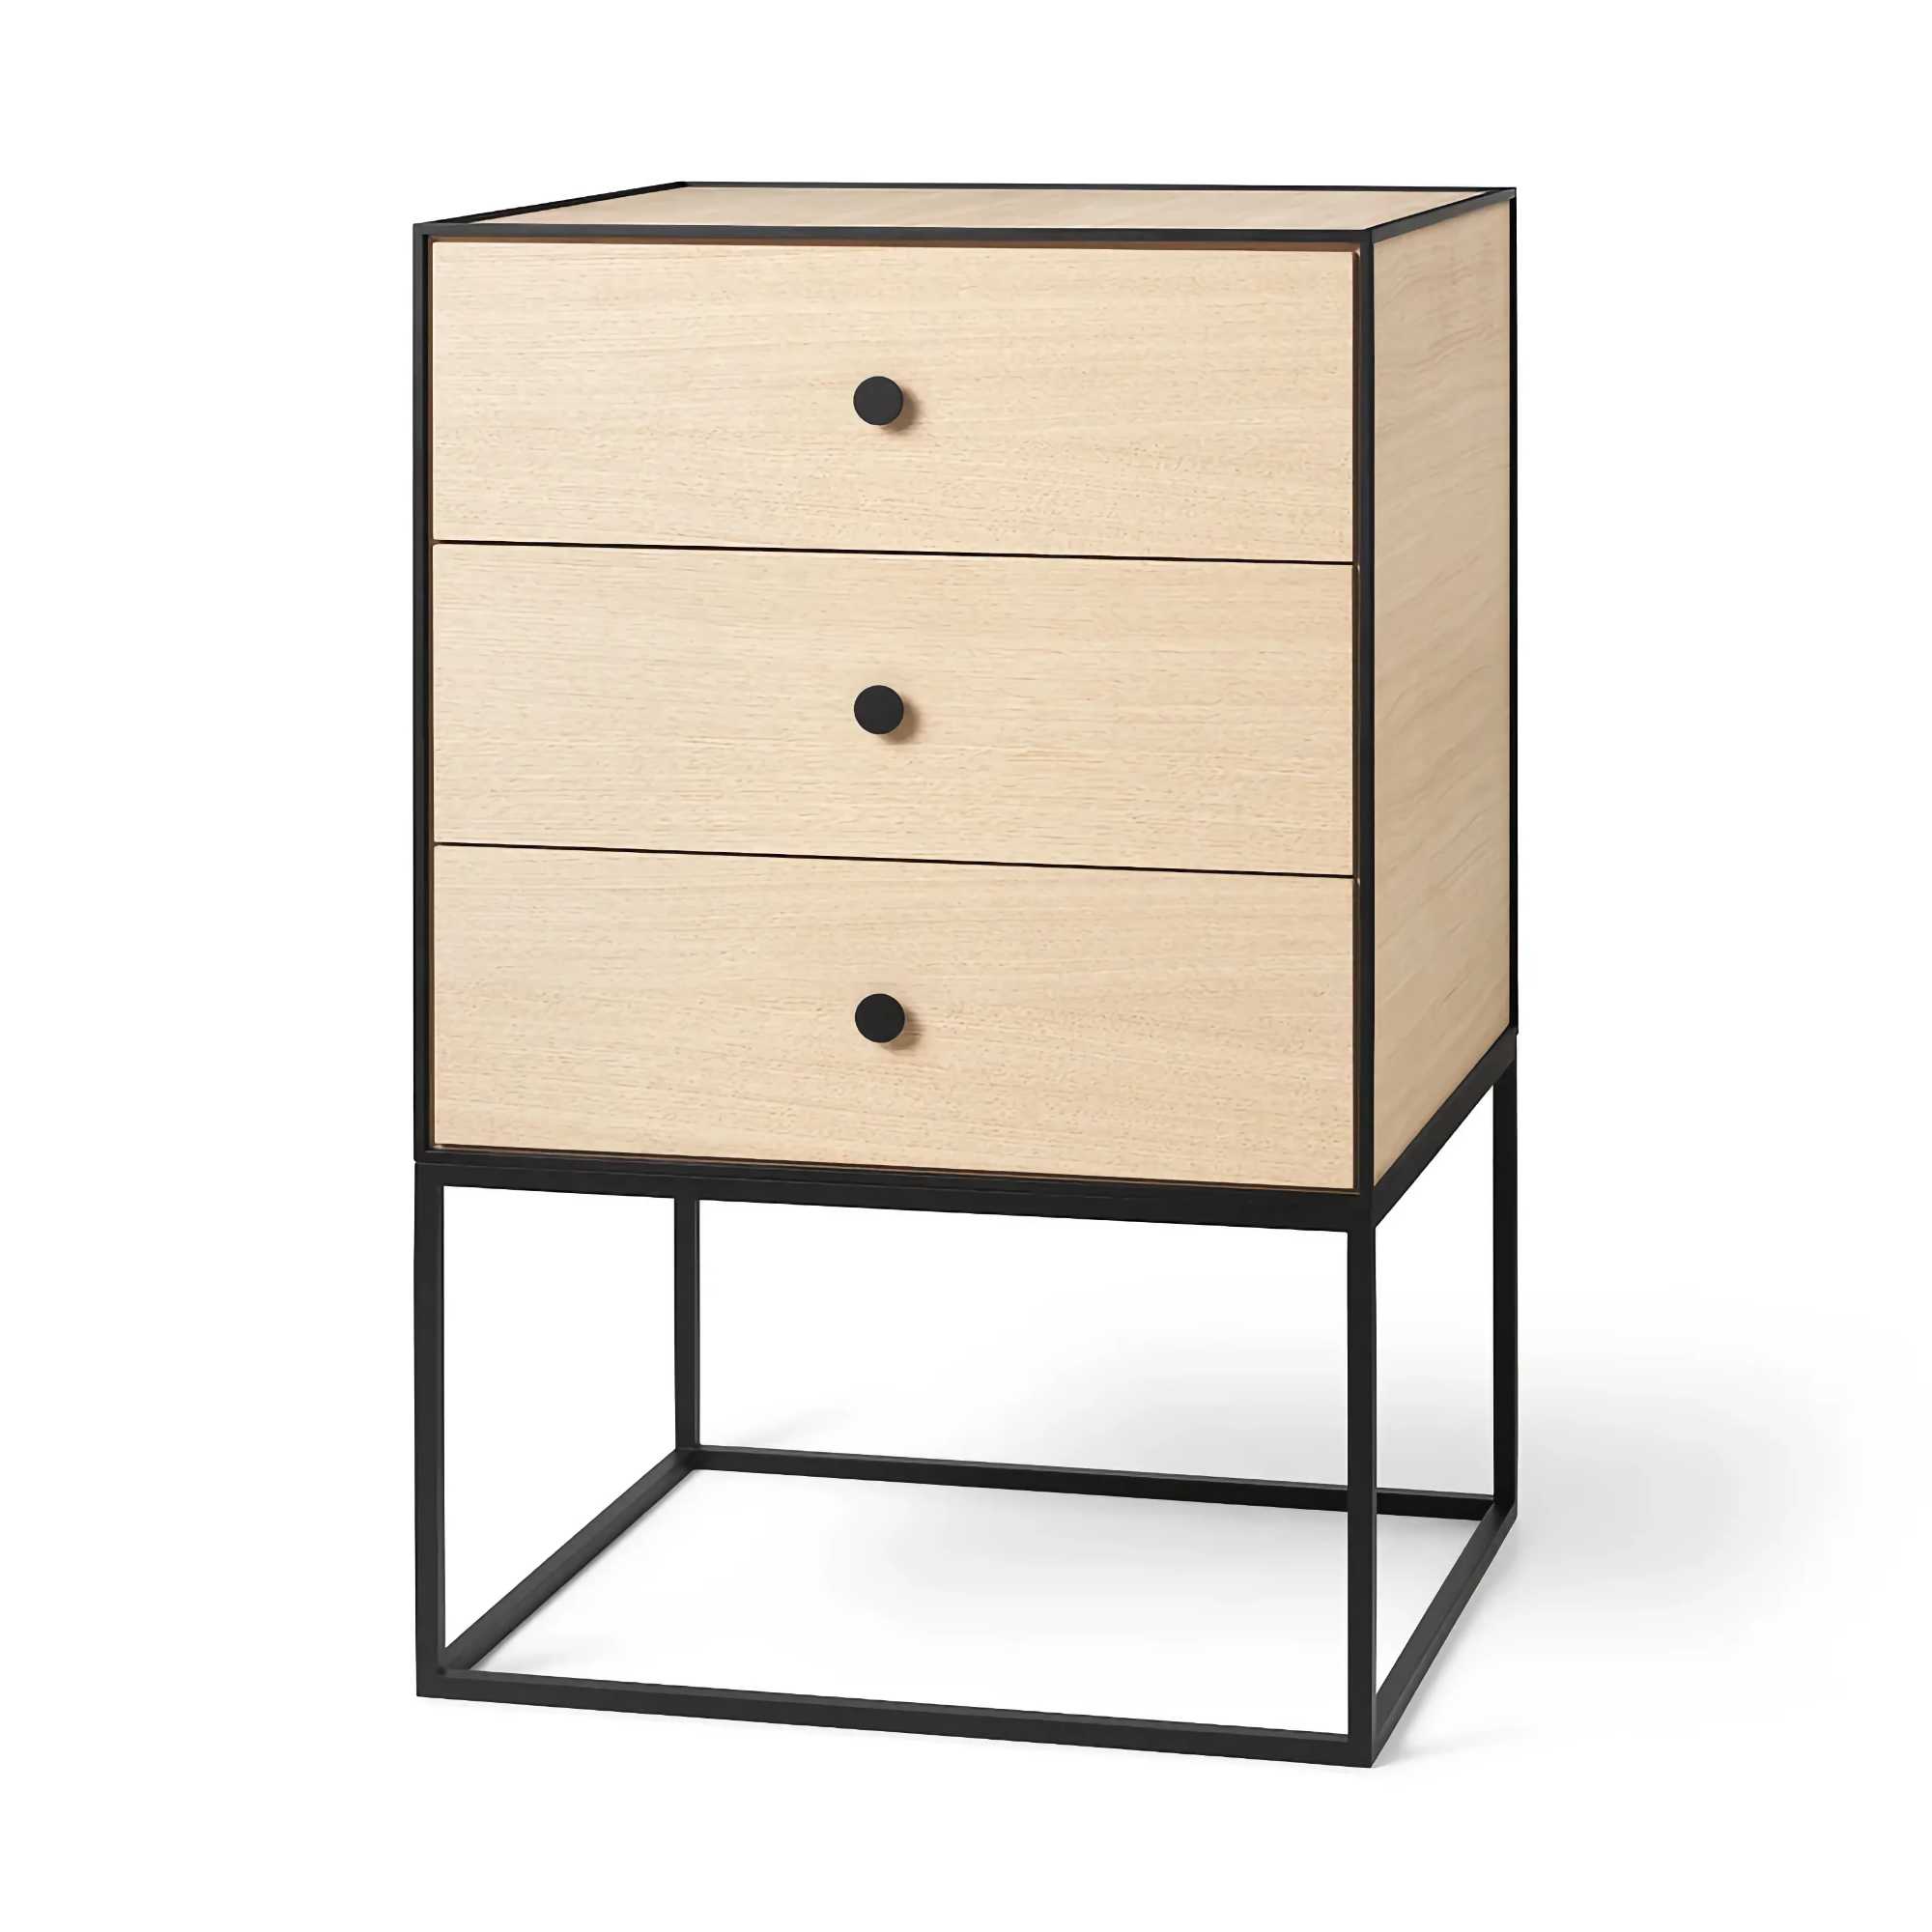 Audo Copenhagen Frame Sideboard 49 with 3 Drawers